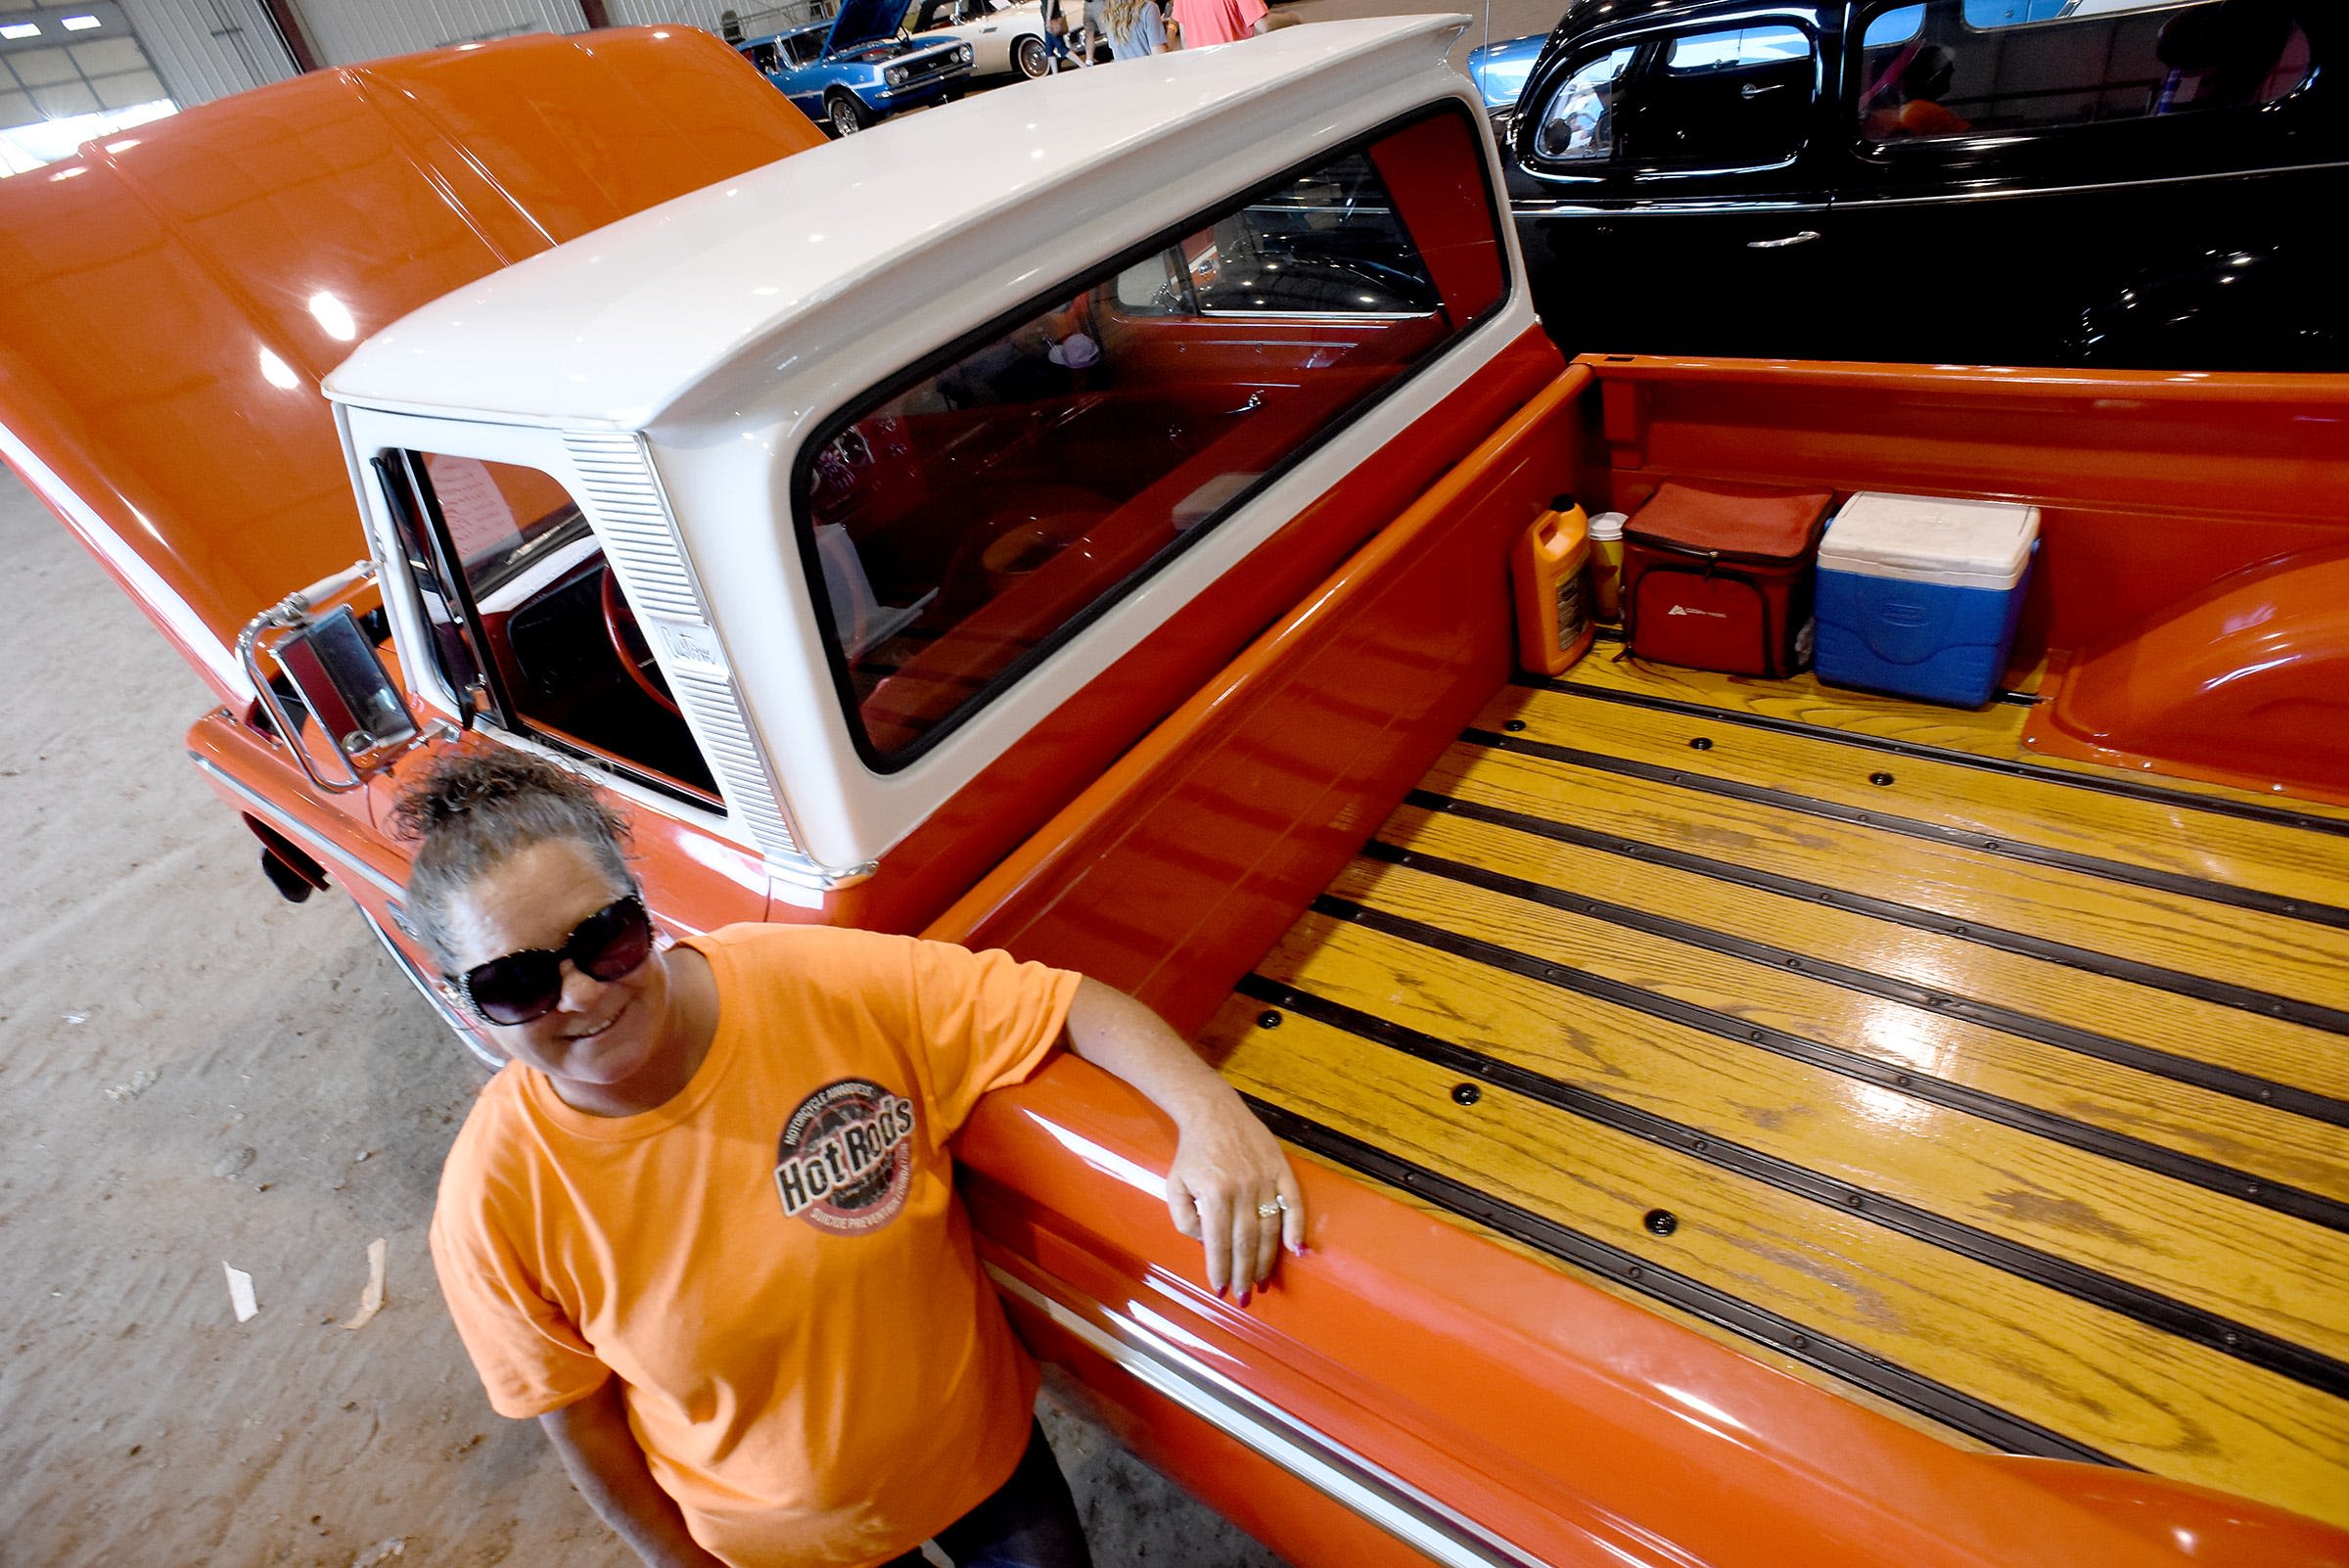 Two area women among vehicle owners at Monroe County Fair's car show